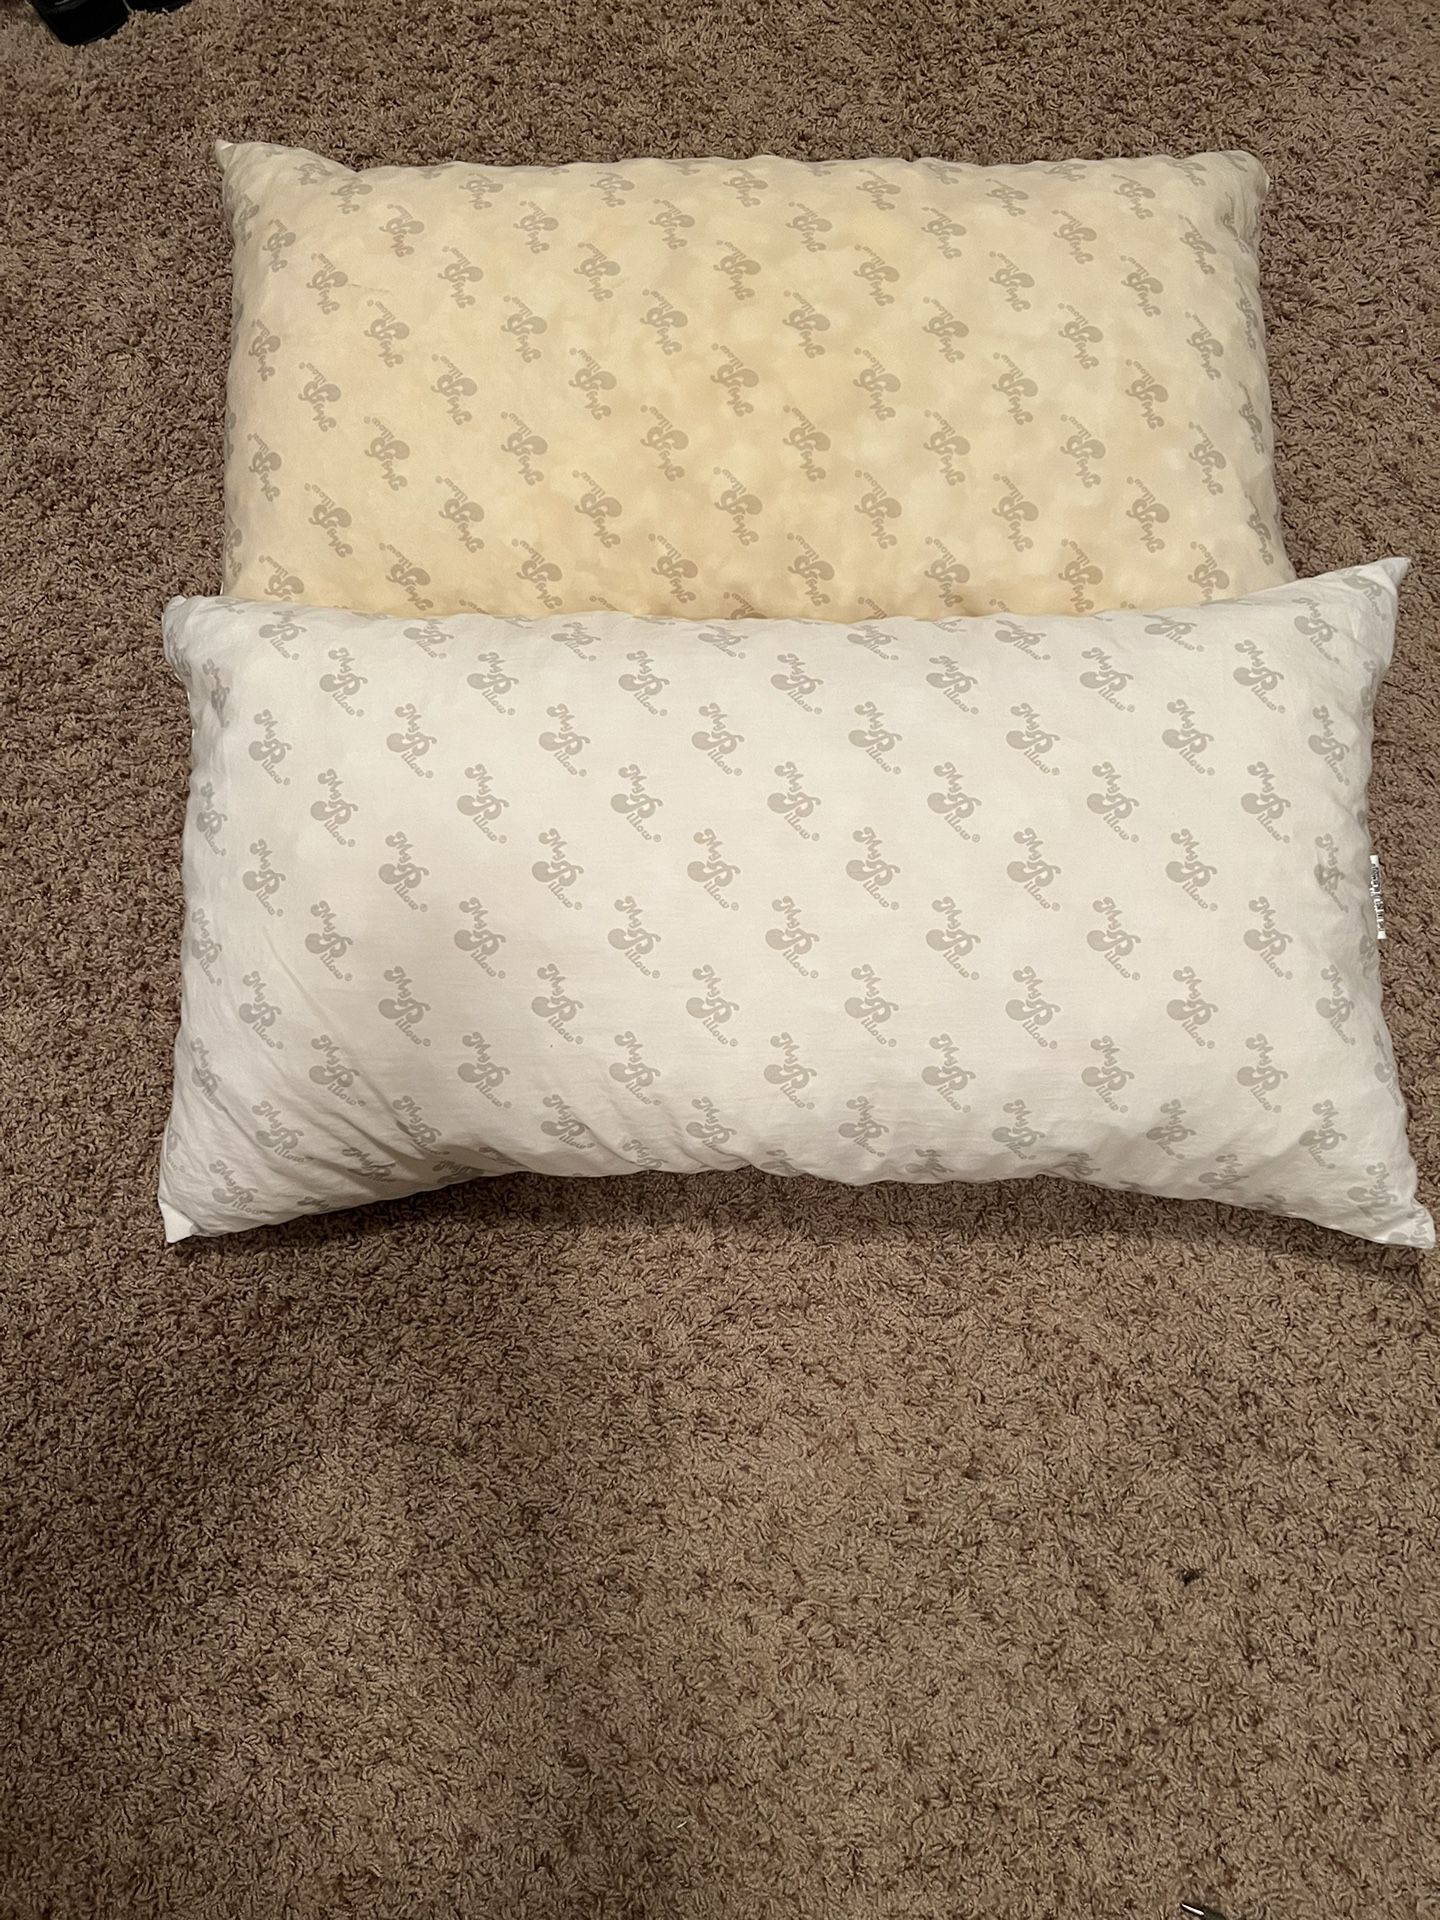 My Pillow 2 King Size